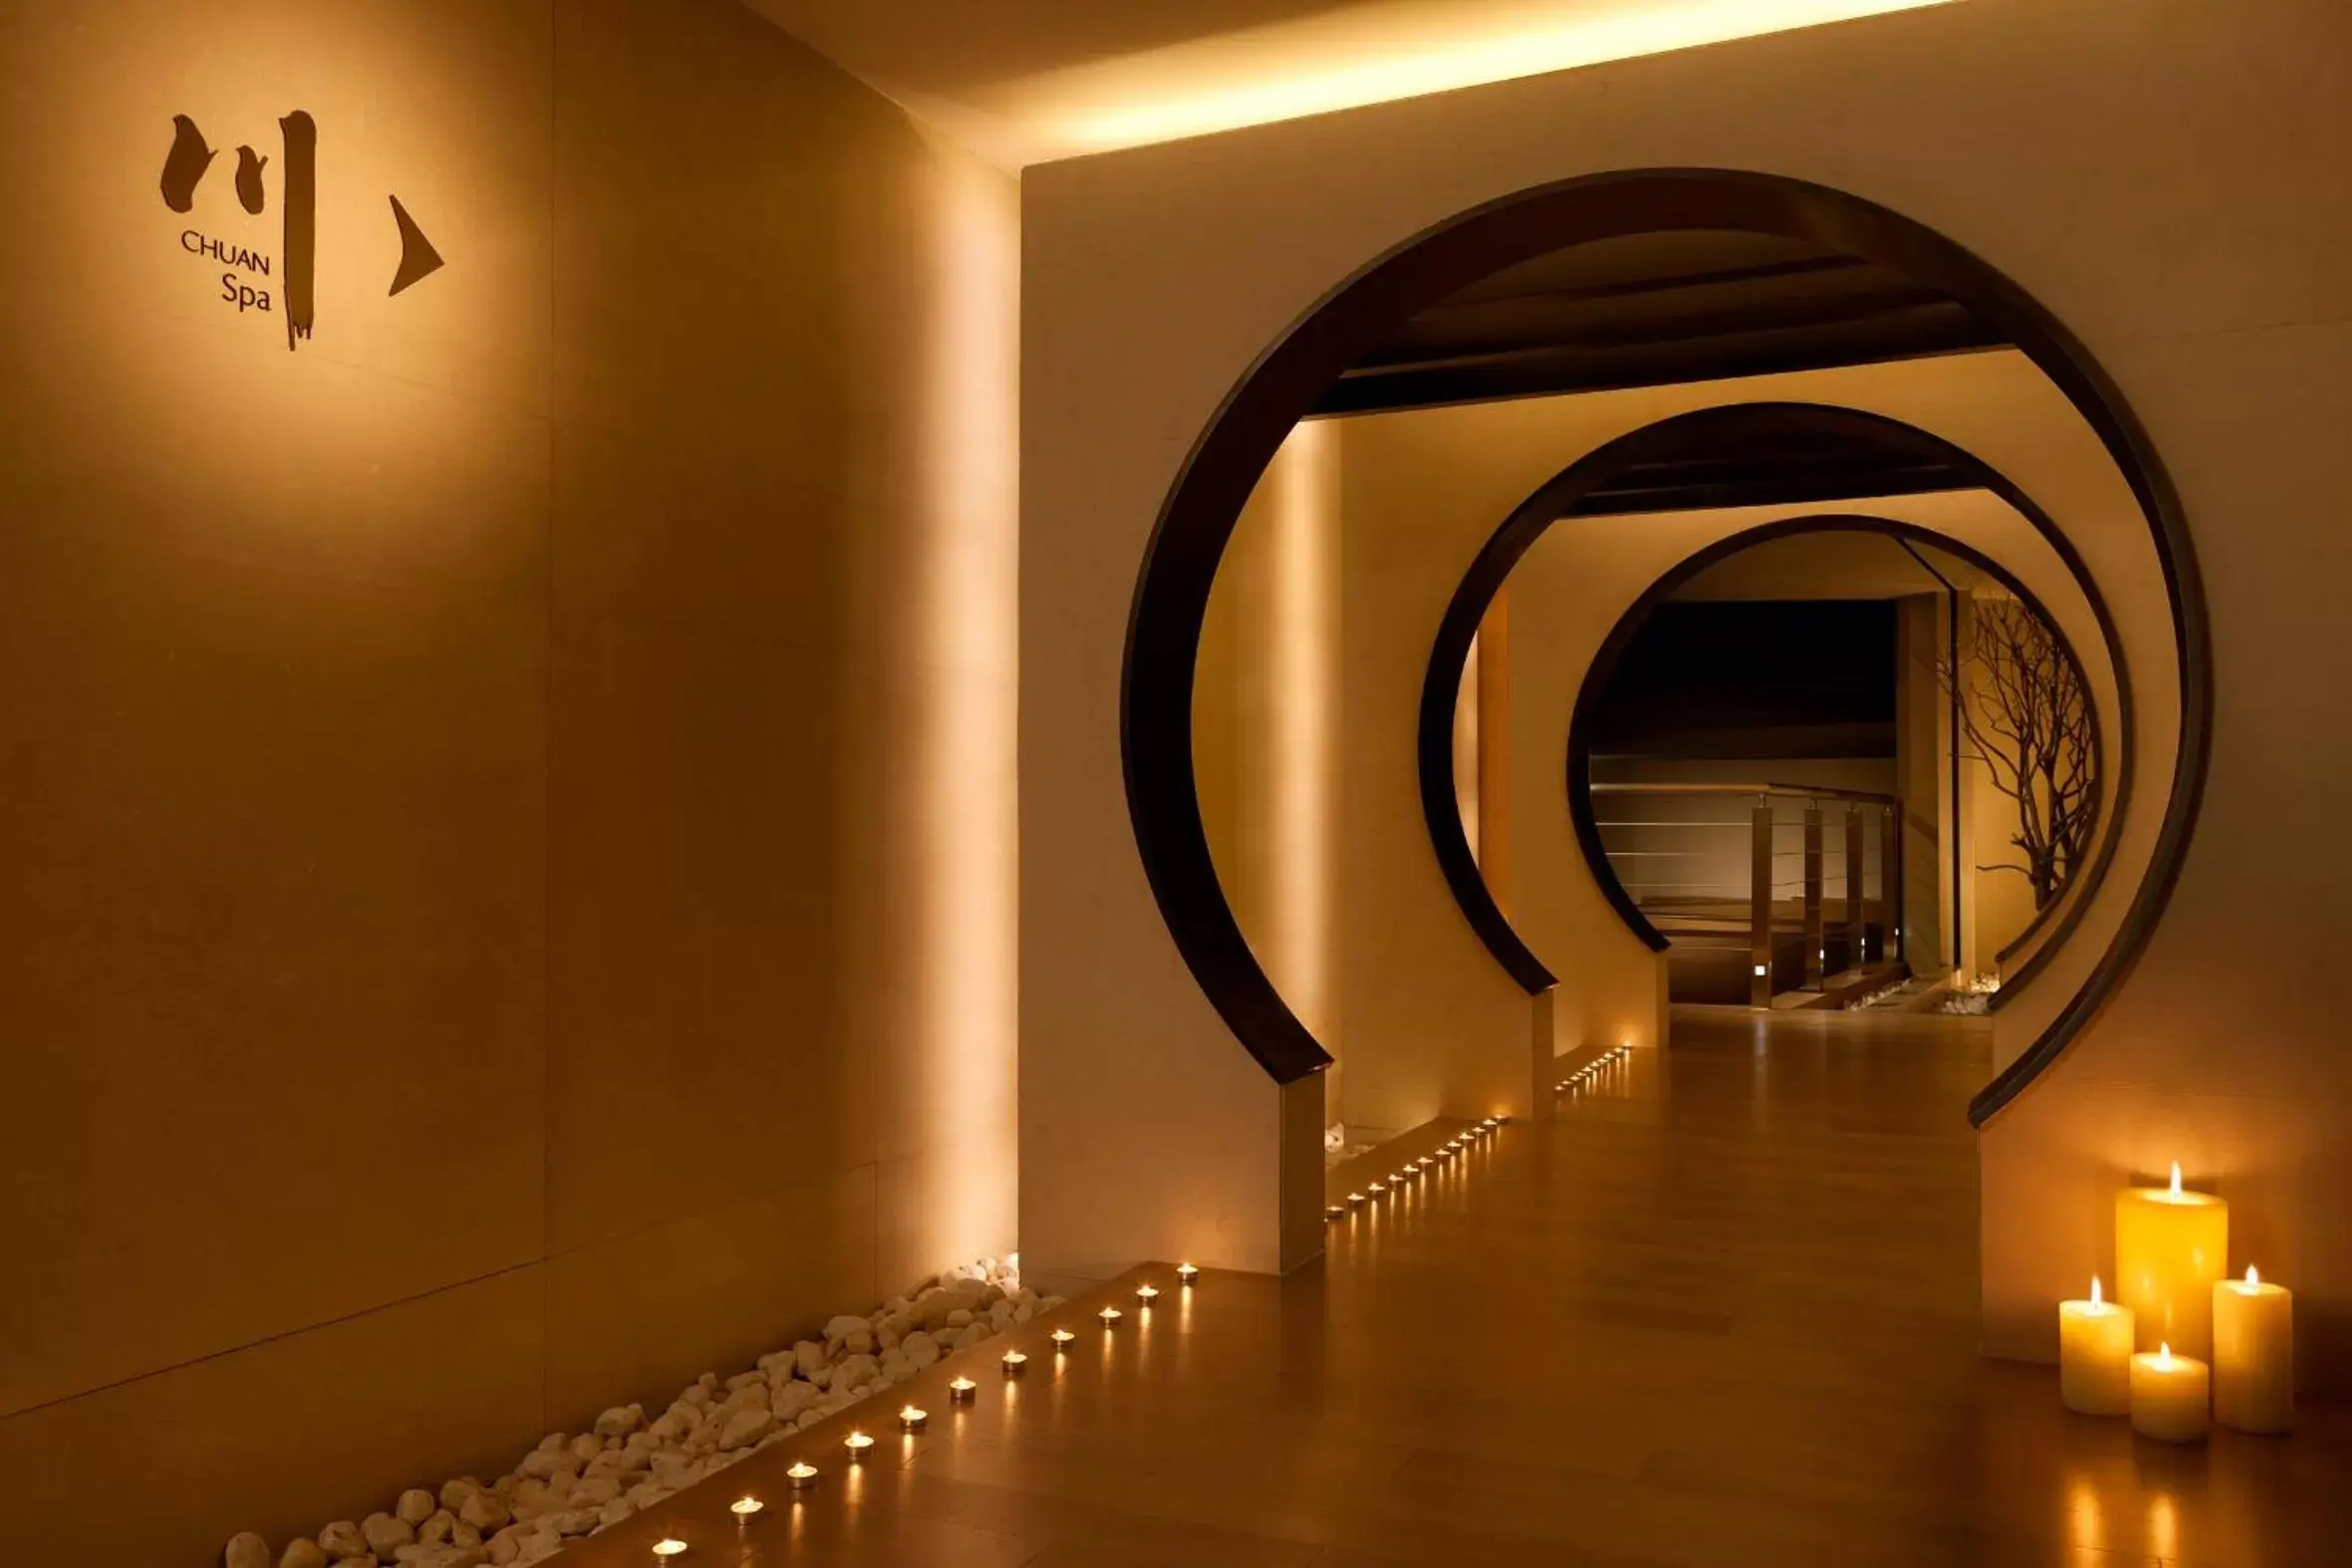 Spa and wellness centre/facilities in The Langham, Shanghai, Xintiandi